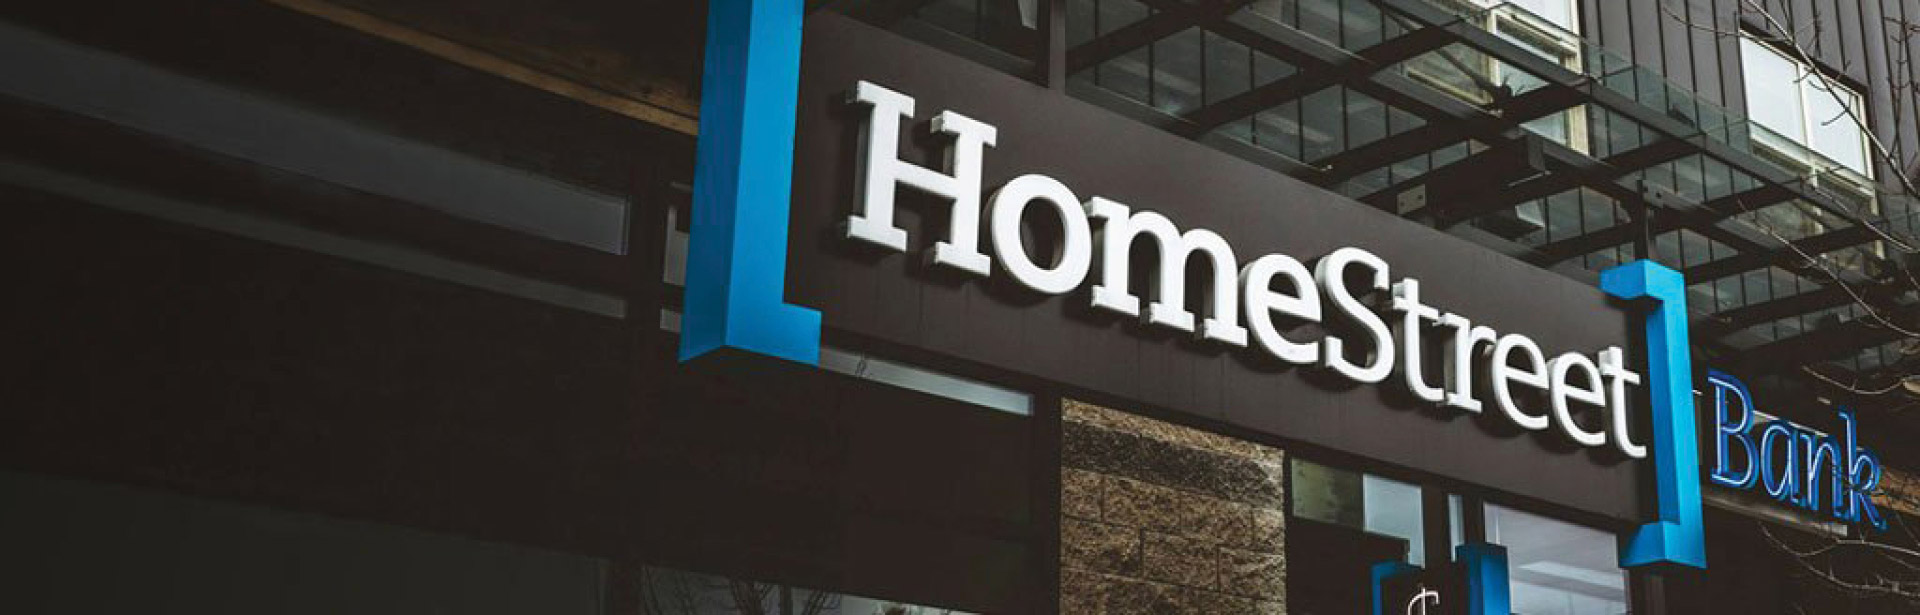 HomeStreet Bank sign in front of building